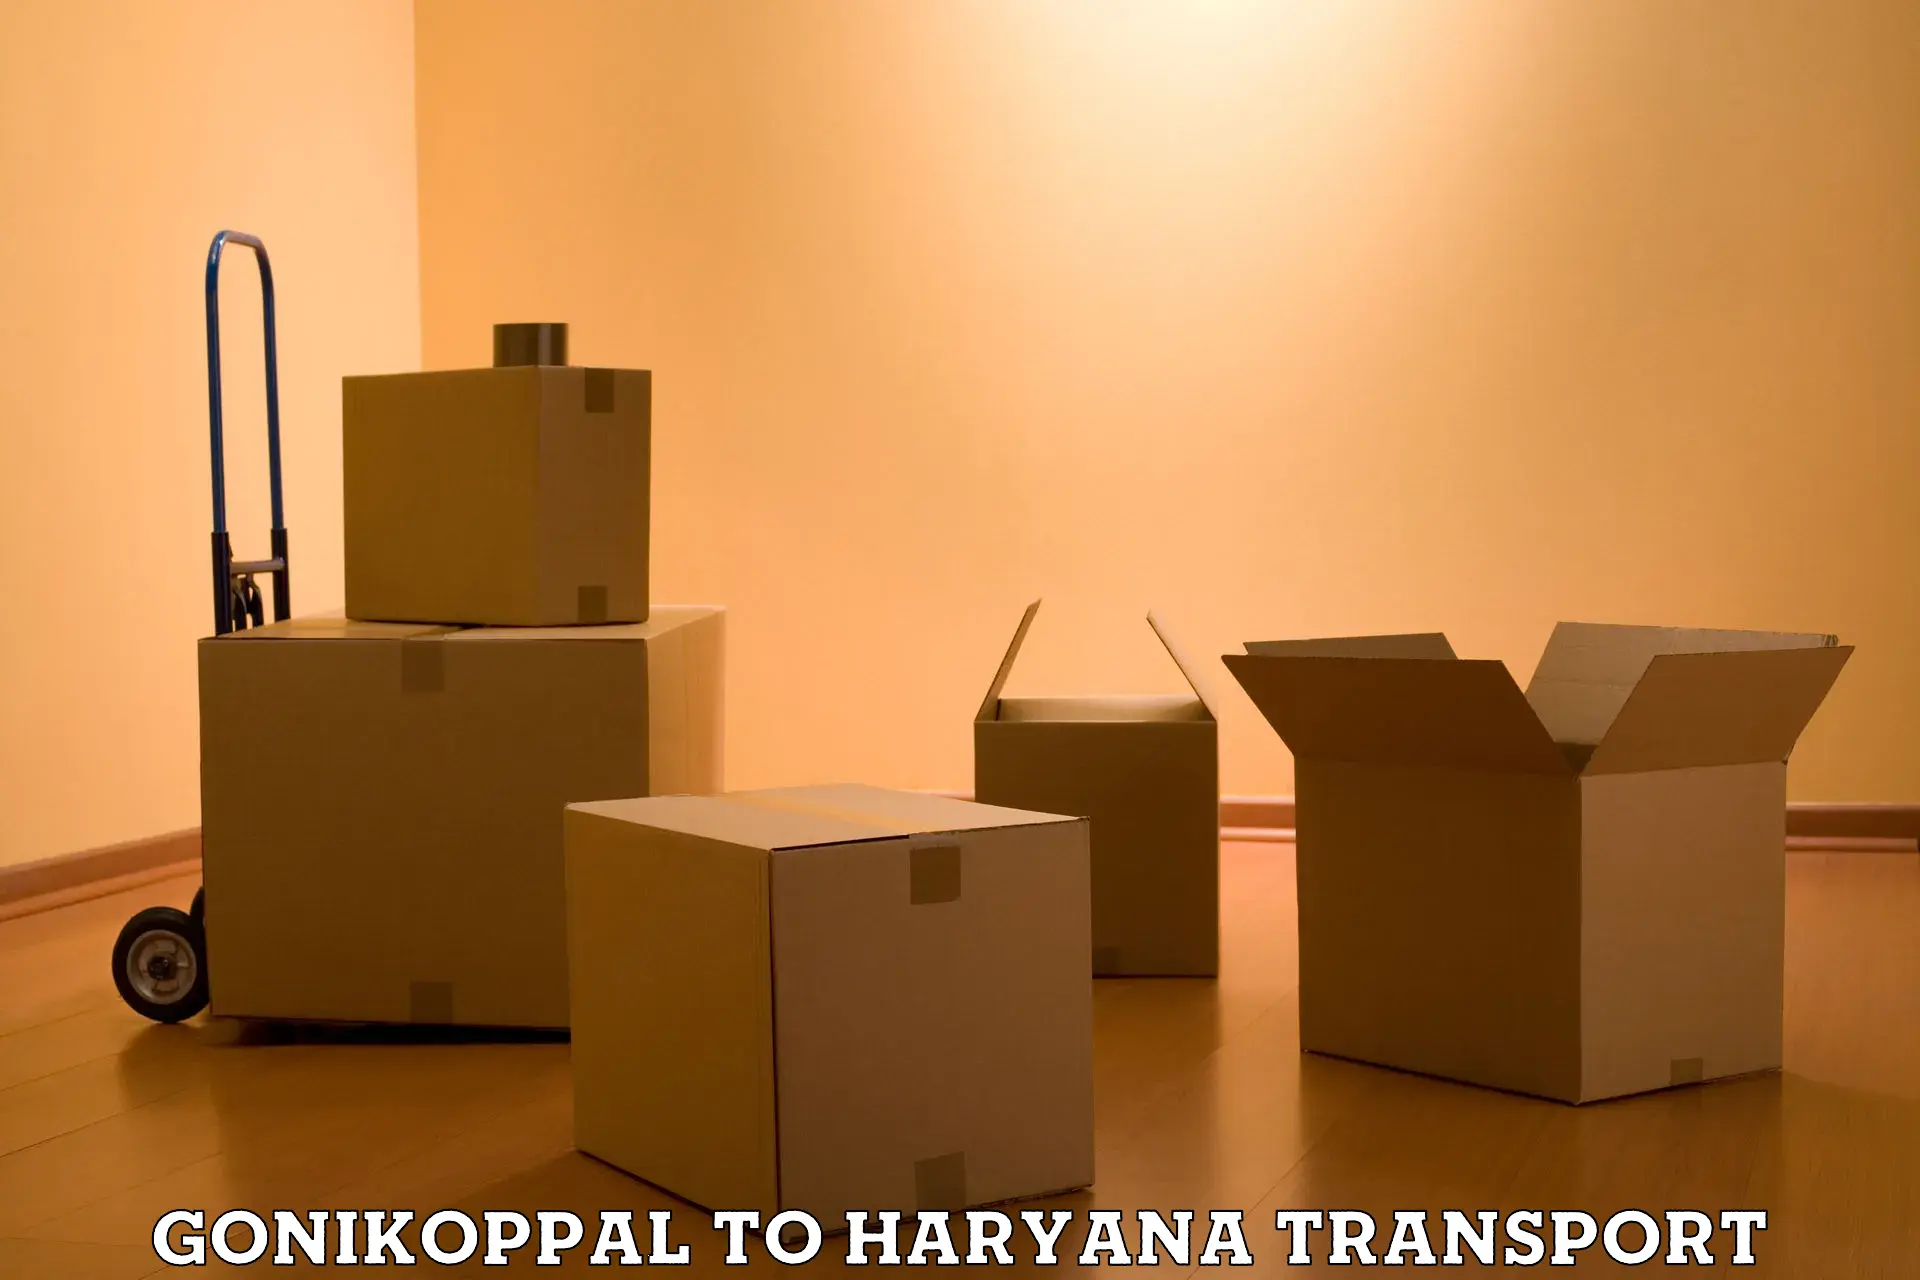 Container transport service Gonikoppal to Panchkula